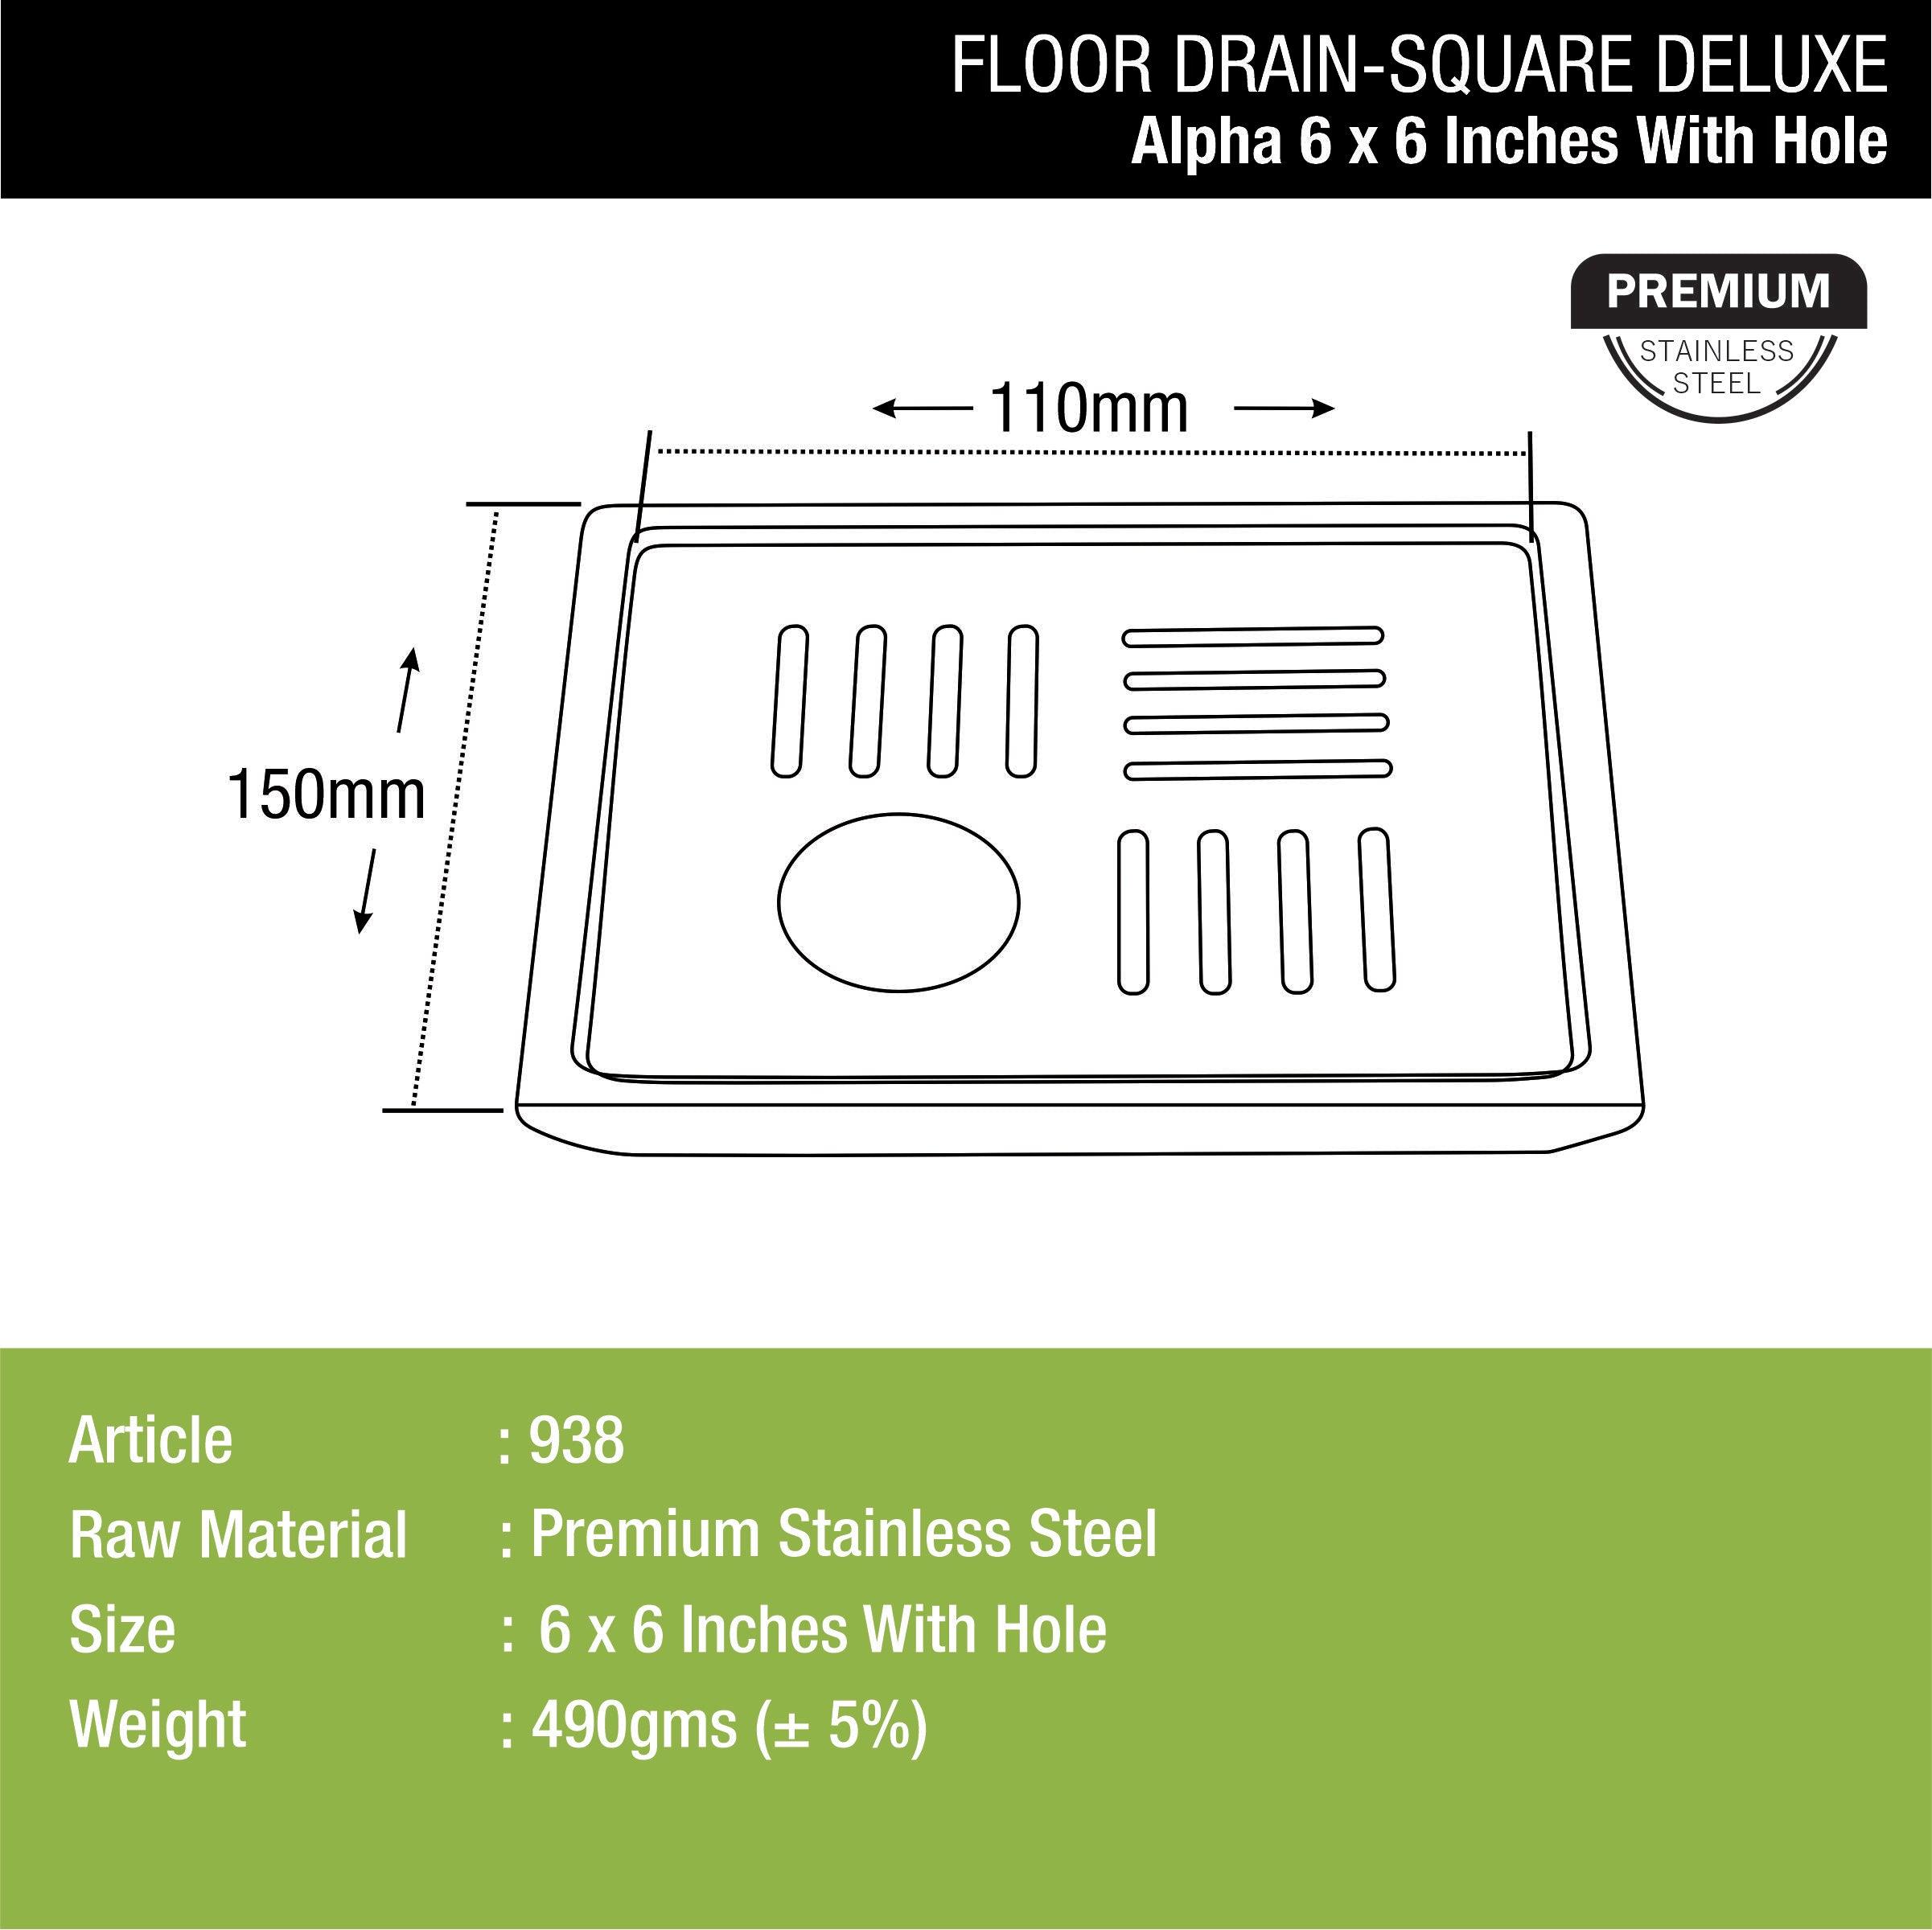 Alpha Deluxe Square Floor Drain (6 x 6 Inches) with Hole dimensions and sizes